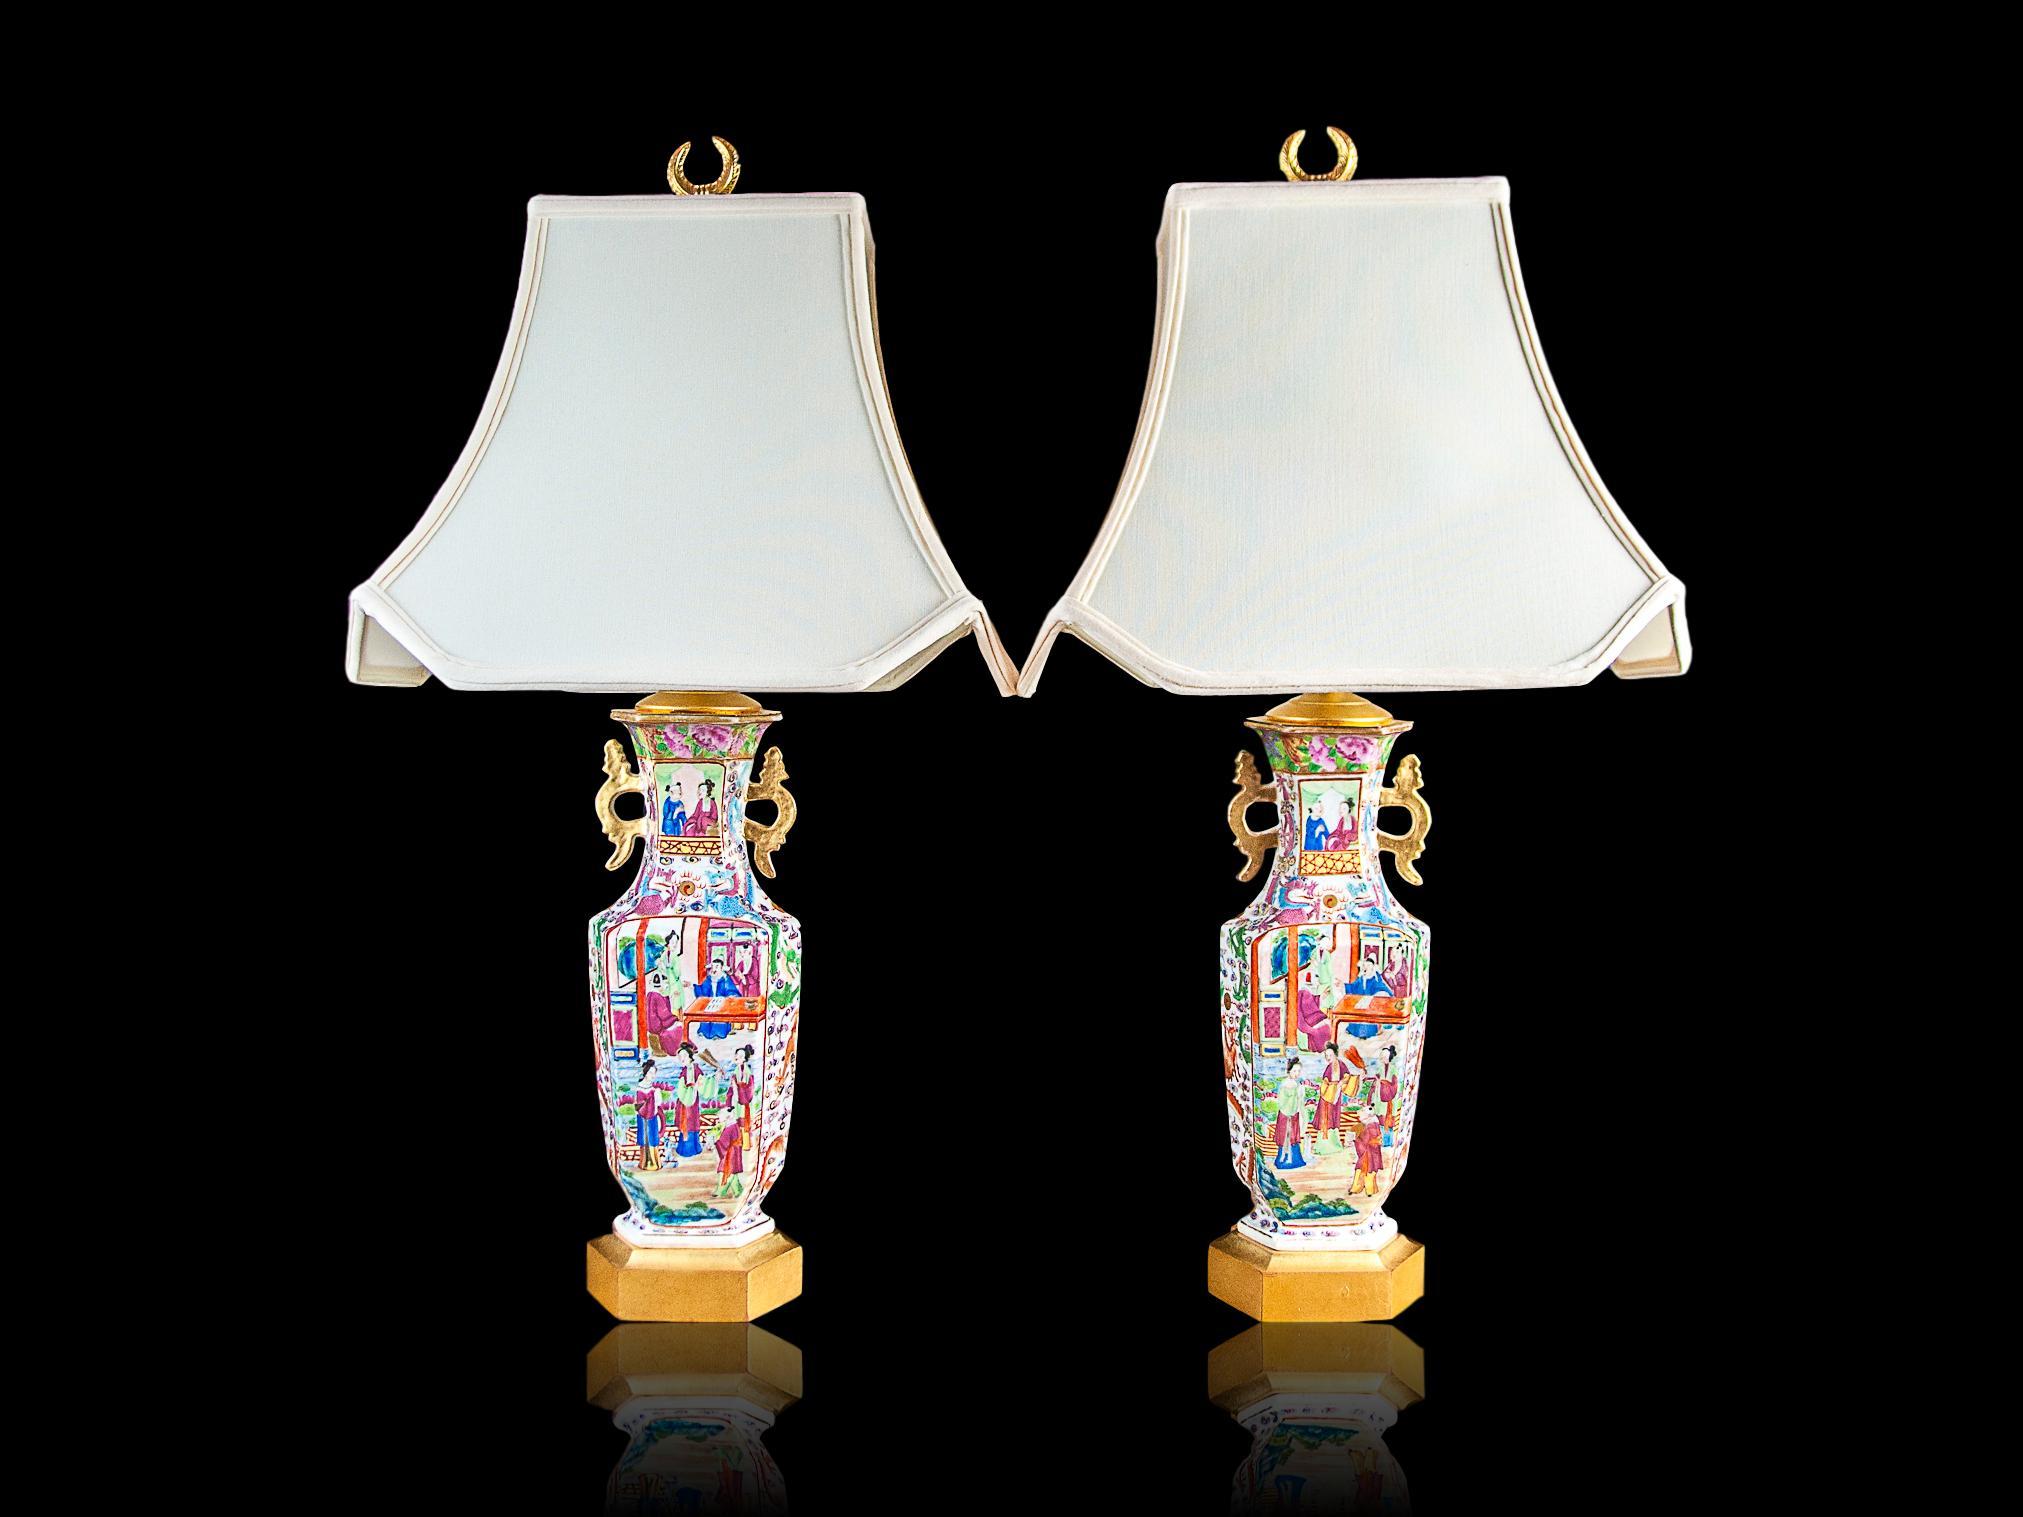 Superb pair of Chinese Famille rose mandarin vases, canton, circa 1840 Mounted as lamps. Beautifully enameled with rare scenes of a marriage, its brokering and ceremony, with the couple on the necks of the vases between two gilt archaistic